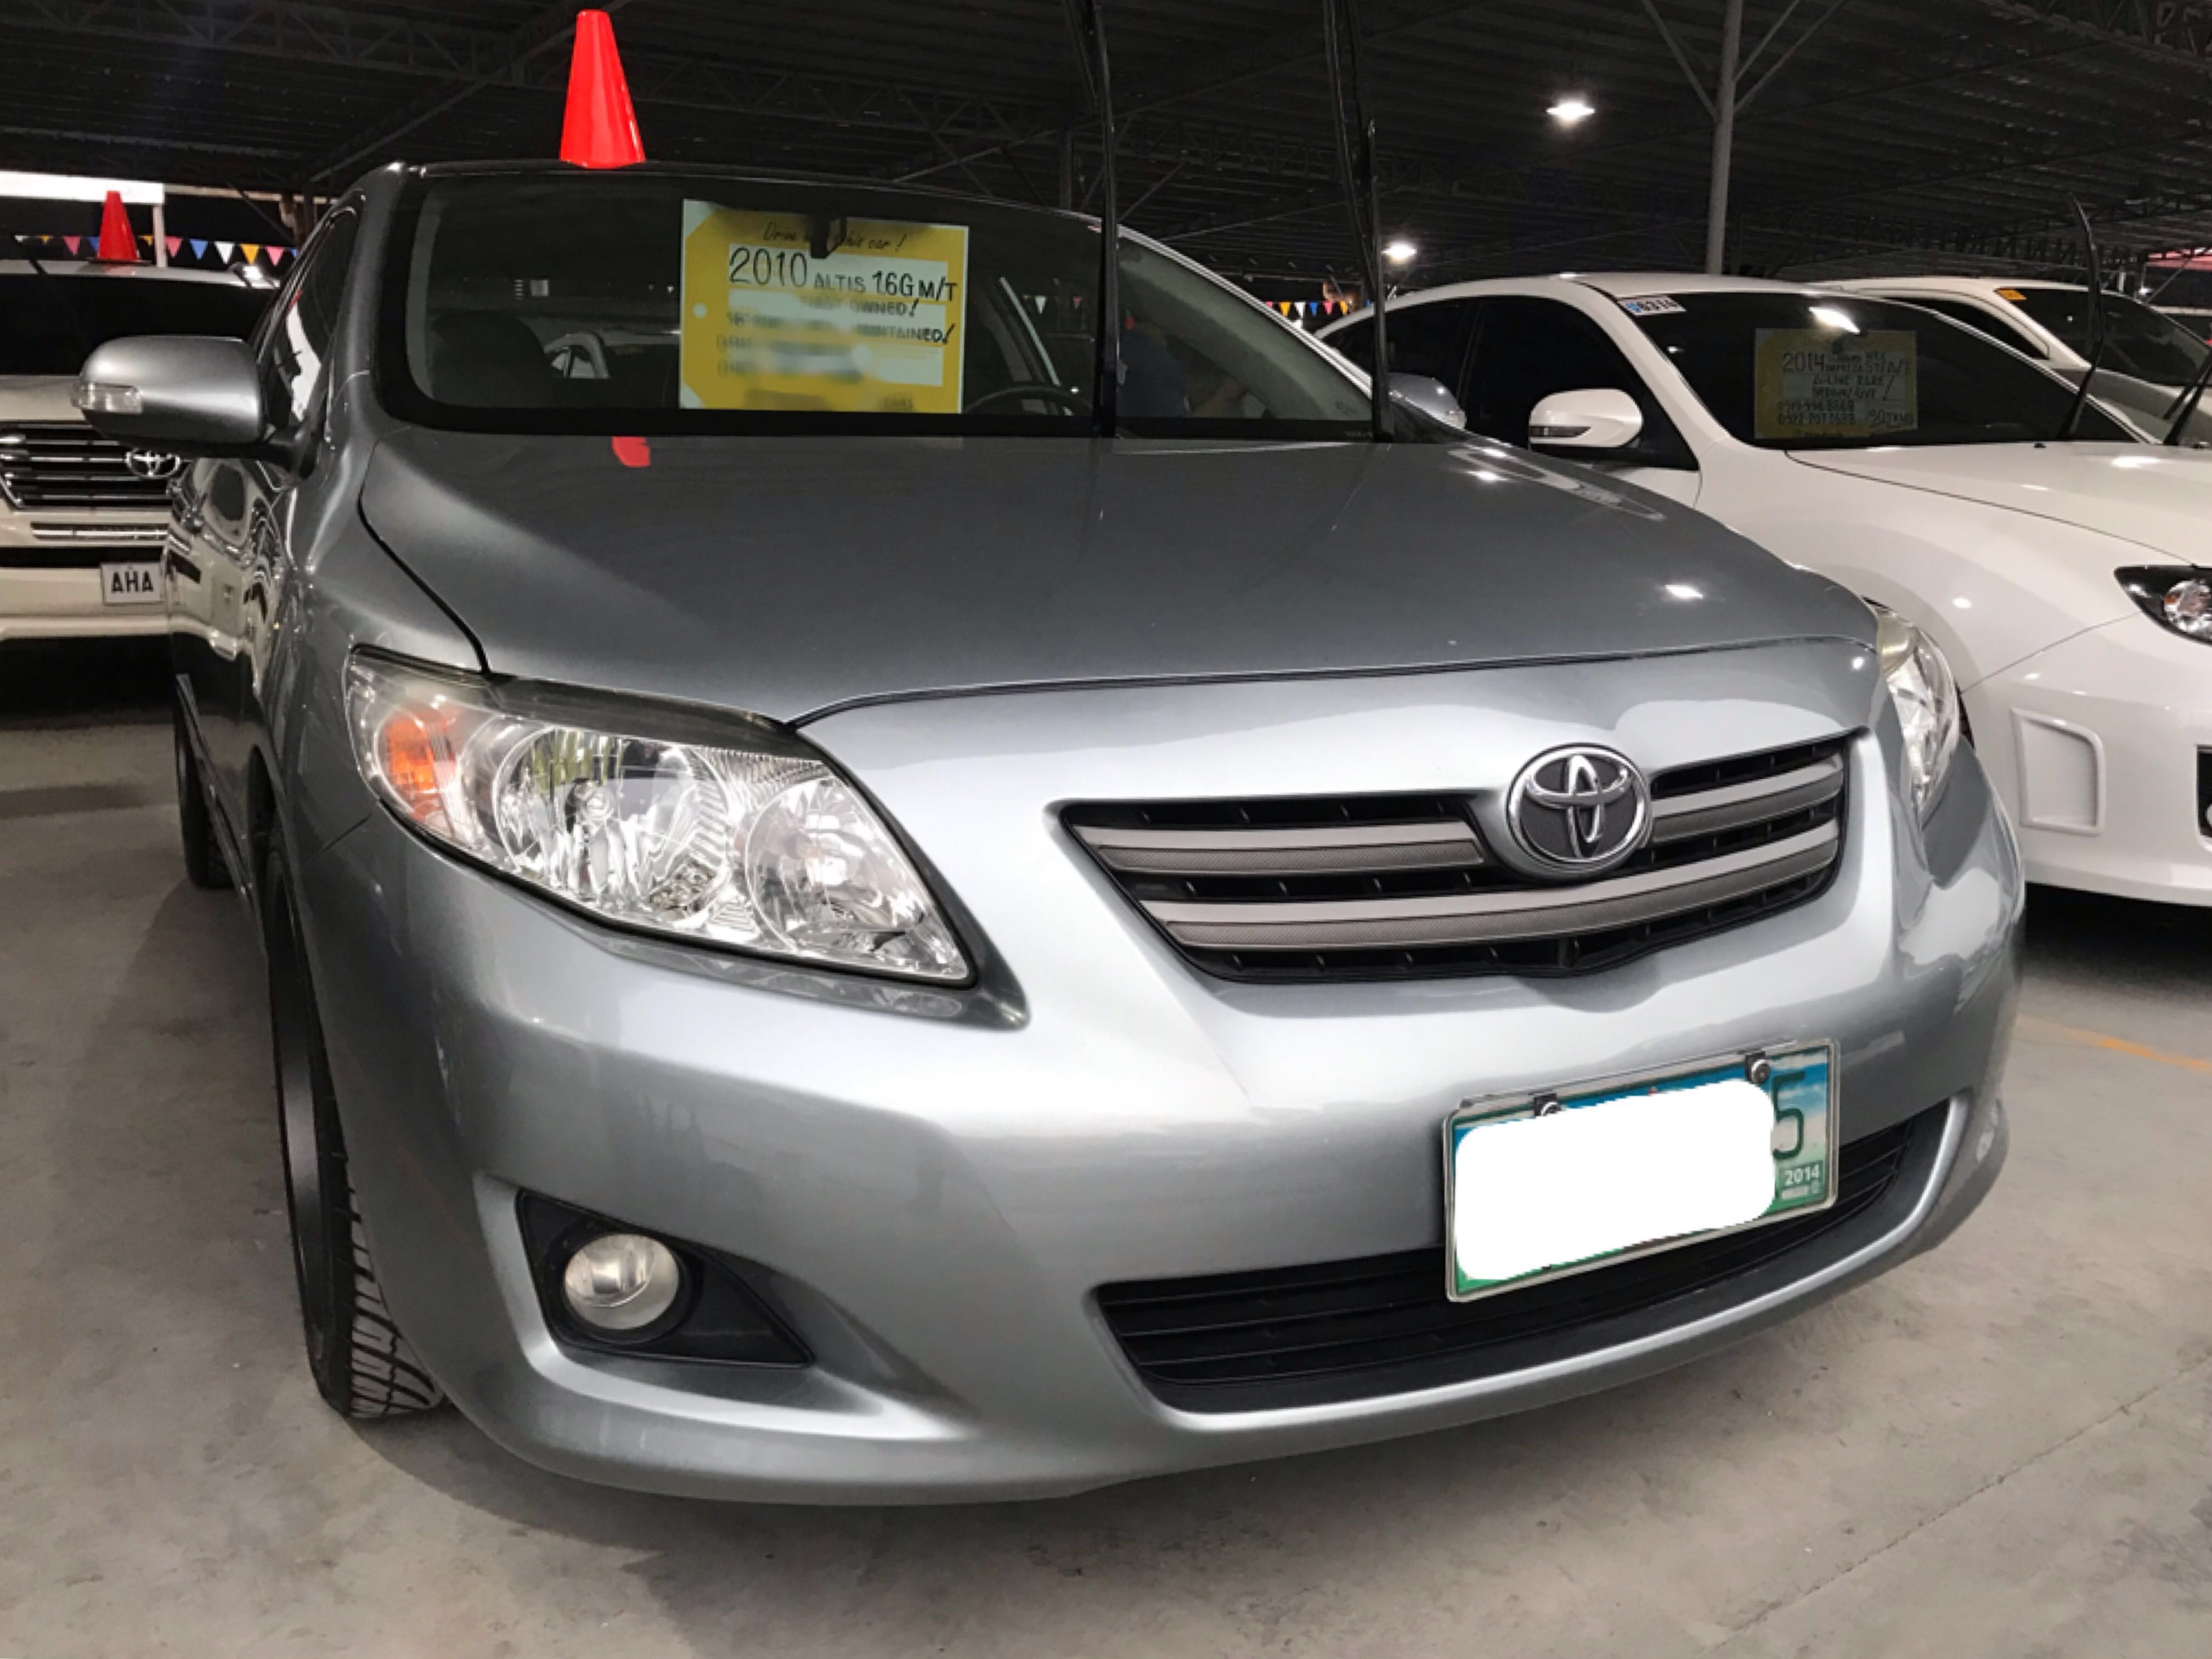 🚩Toyota Corolla Altis 2010 M/T Well Maintained 18" Rims, Cars for Sale ...